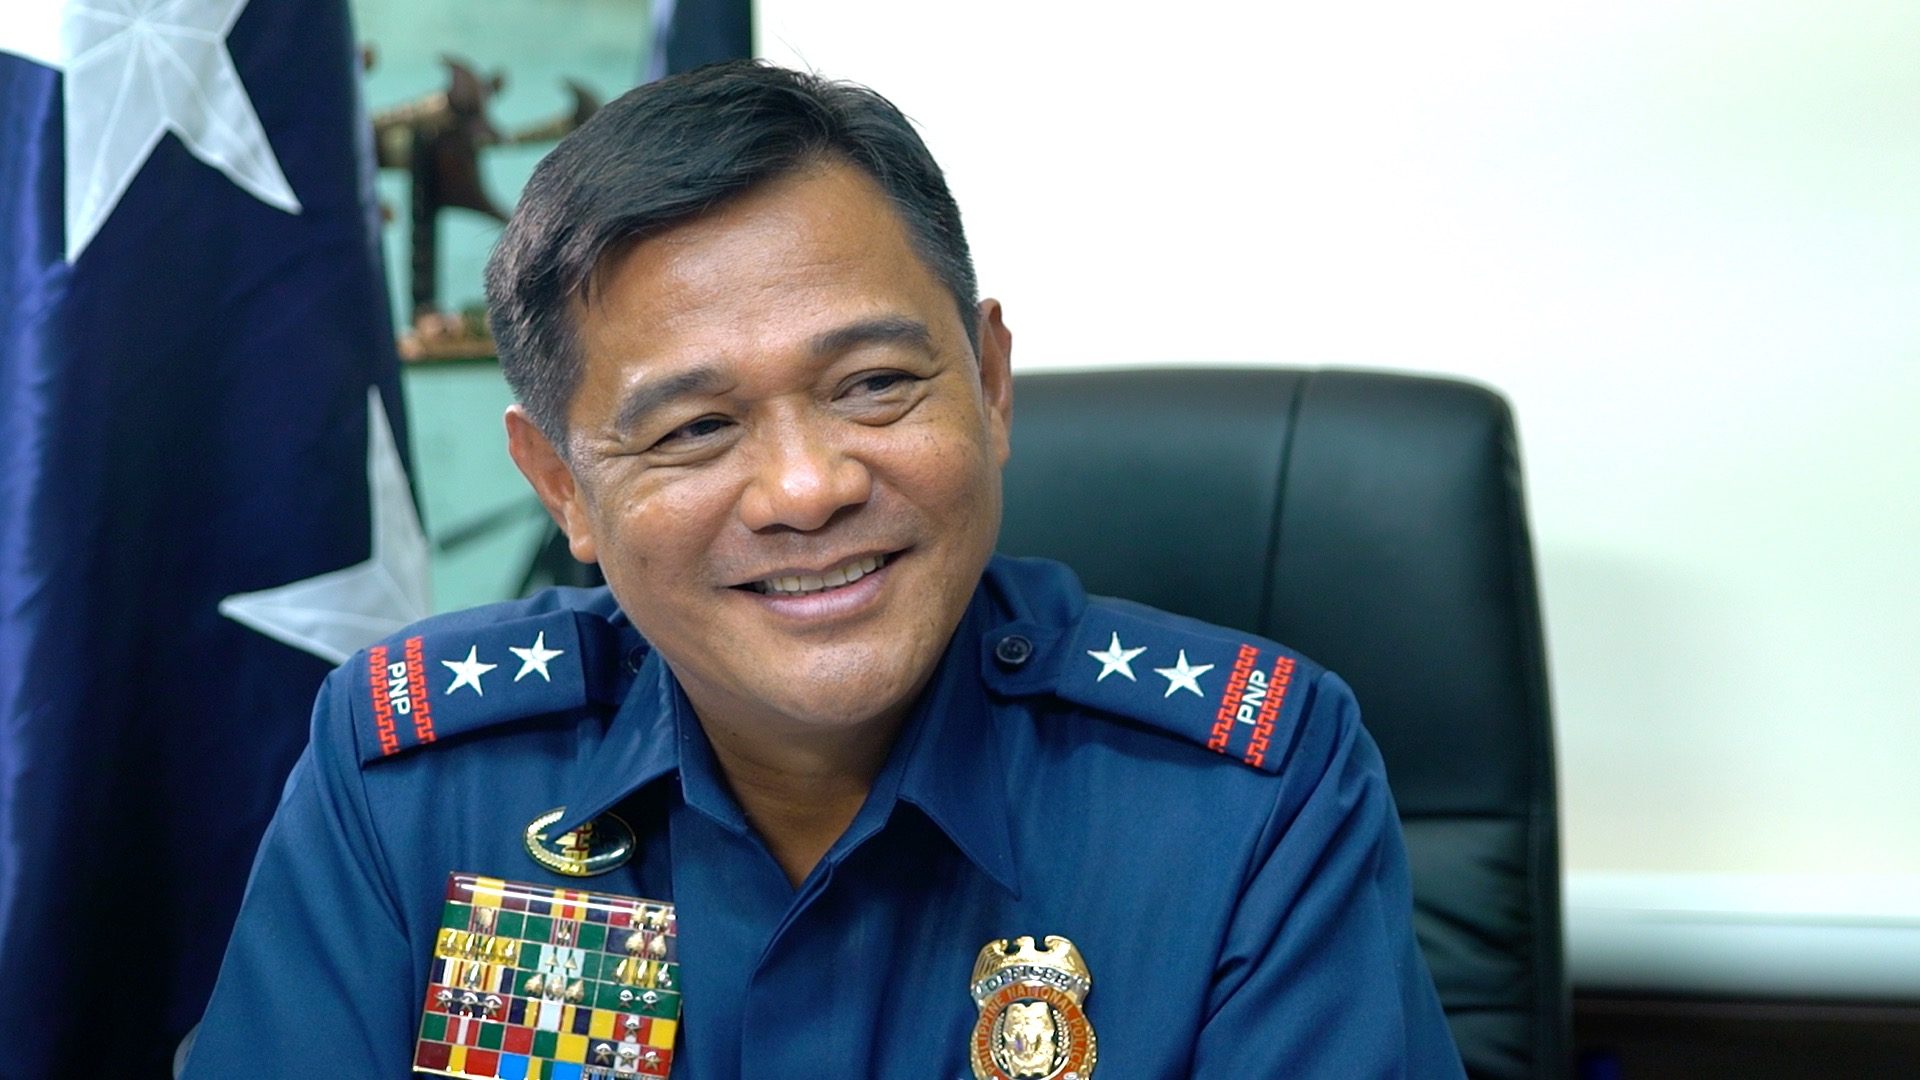 Next Metro Manila police chief one of authors of Oplan Tokhang